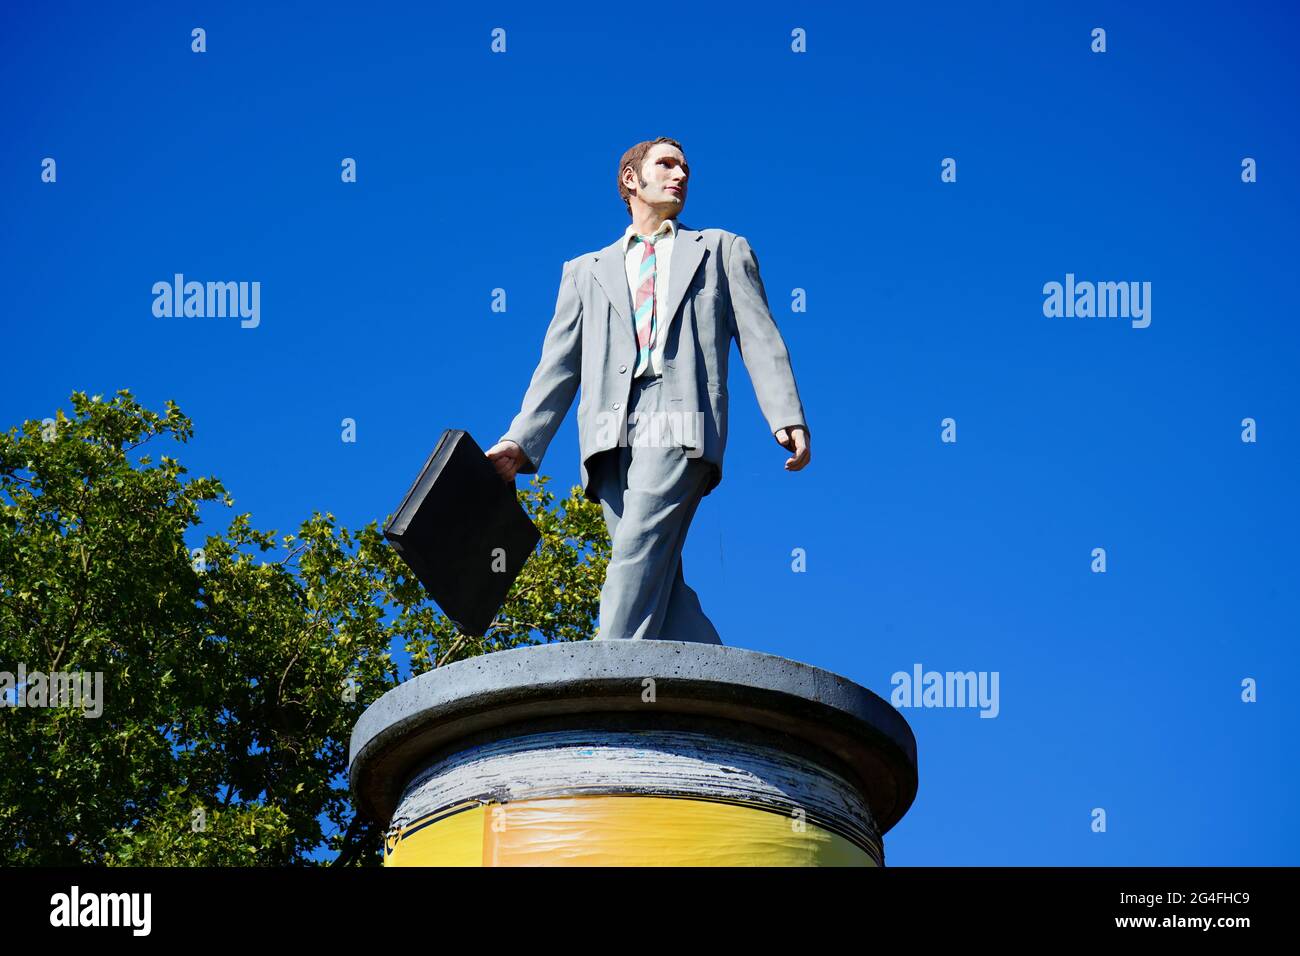 The life-sized modern art sculpture 'Businessman' by Christoph Pöggeler, standing on an advertising column. These sculpures are called 'Säulenheilige'. Stock Photo